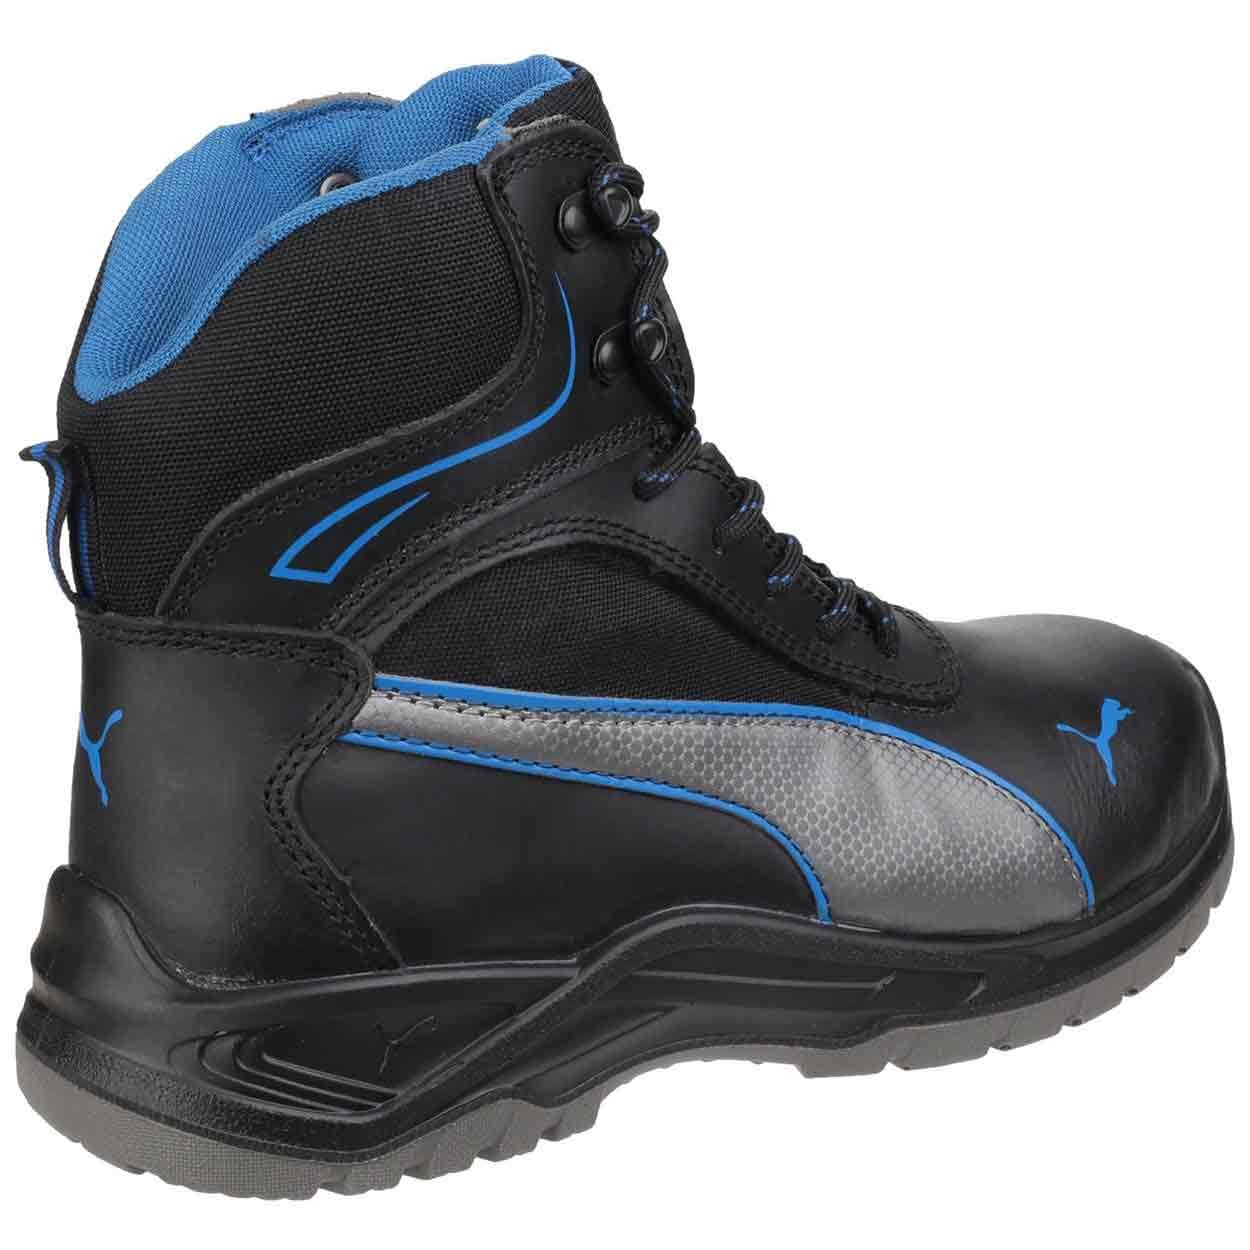 Puma Safety Atomic Mid - Standard Safety Boots - Mens Safety Boots & Shoes  - Safety Footwear - Best Workwear